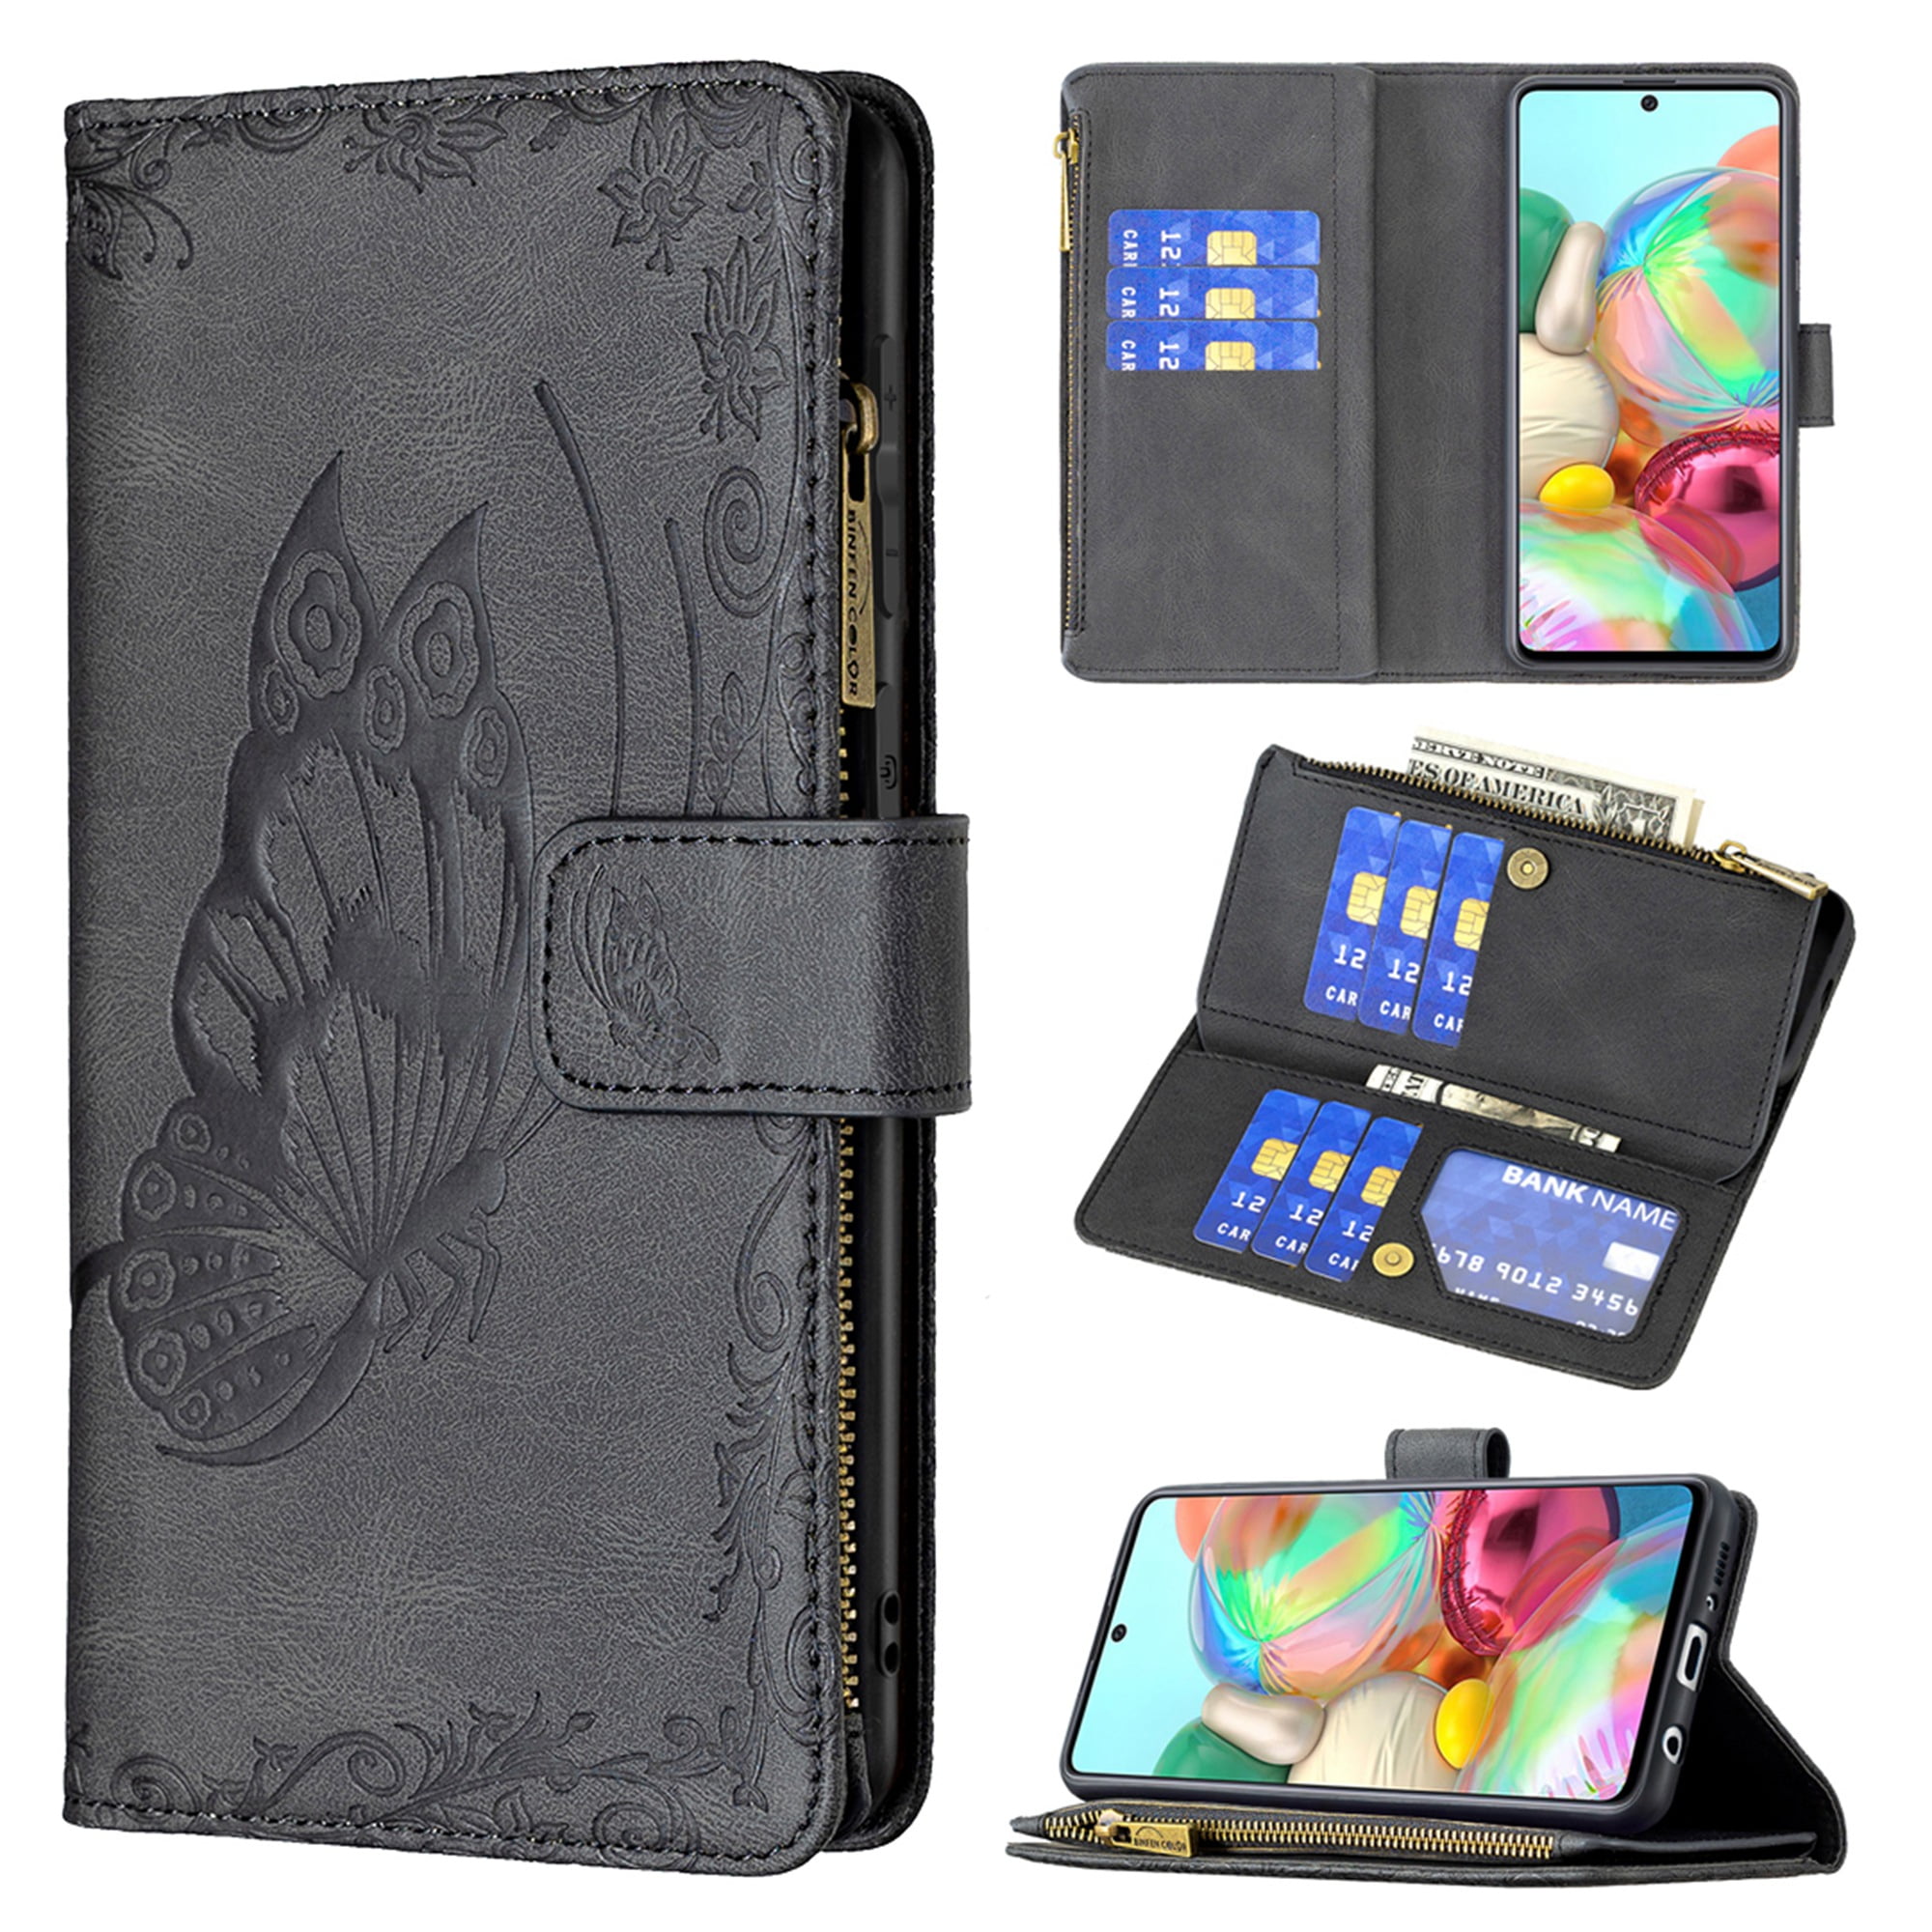 Leather Cover Business Gifts Wallet with Extra Waterproof Underwater Case Flip Case for Samsung Galaxy S8